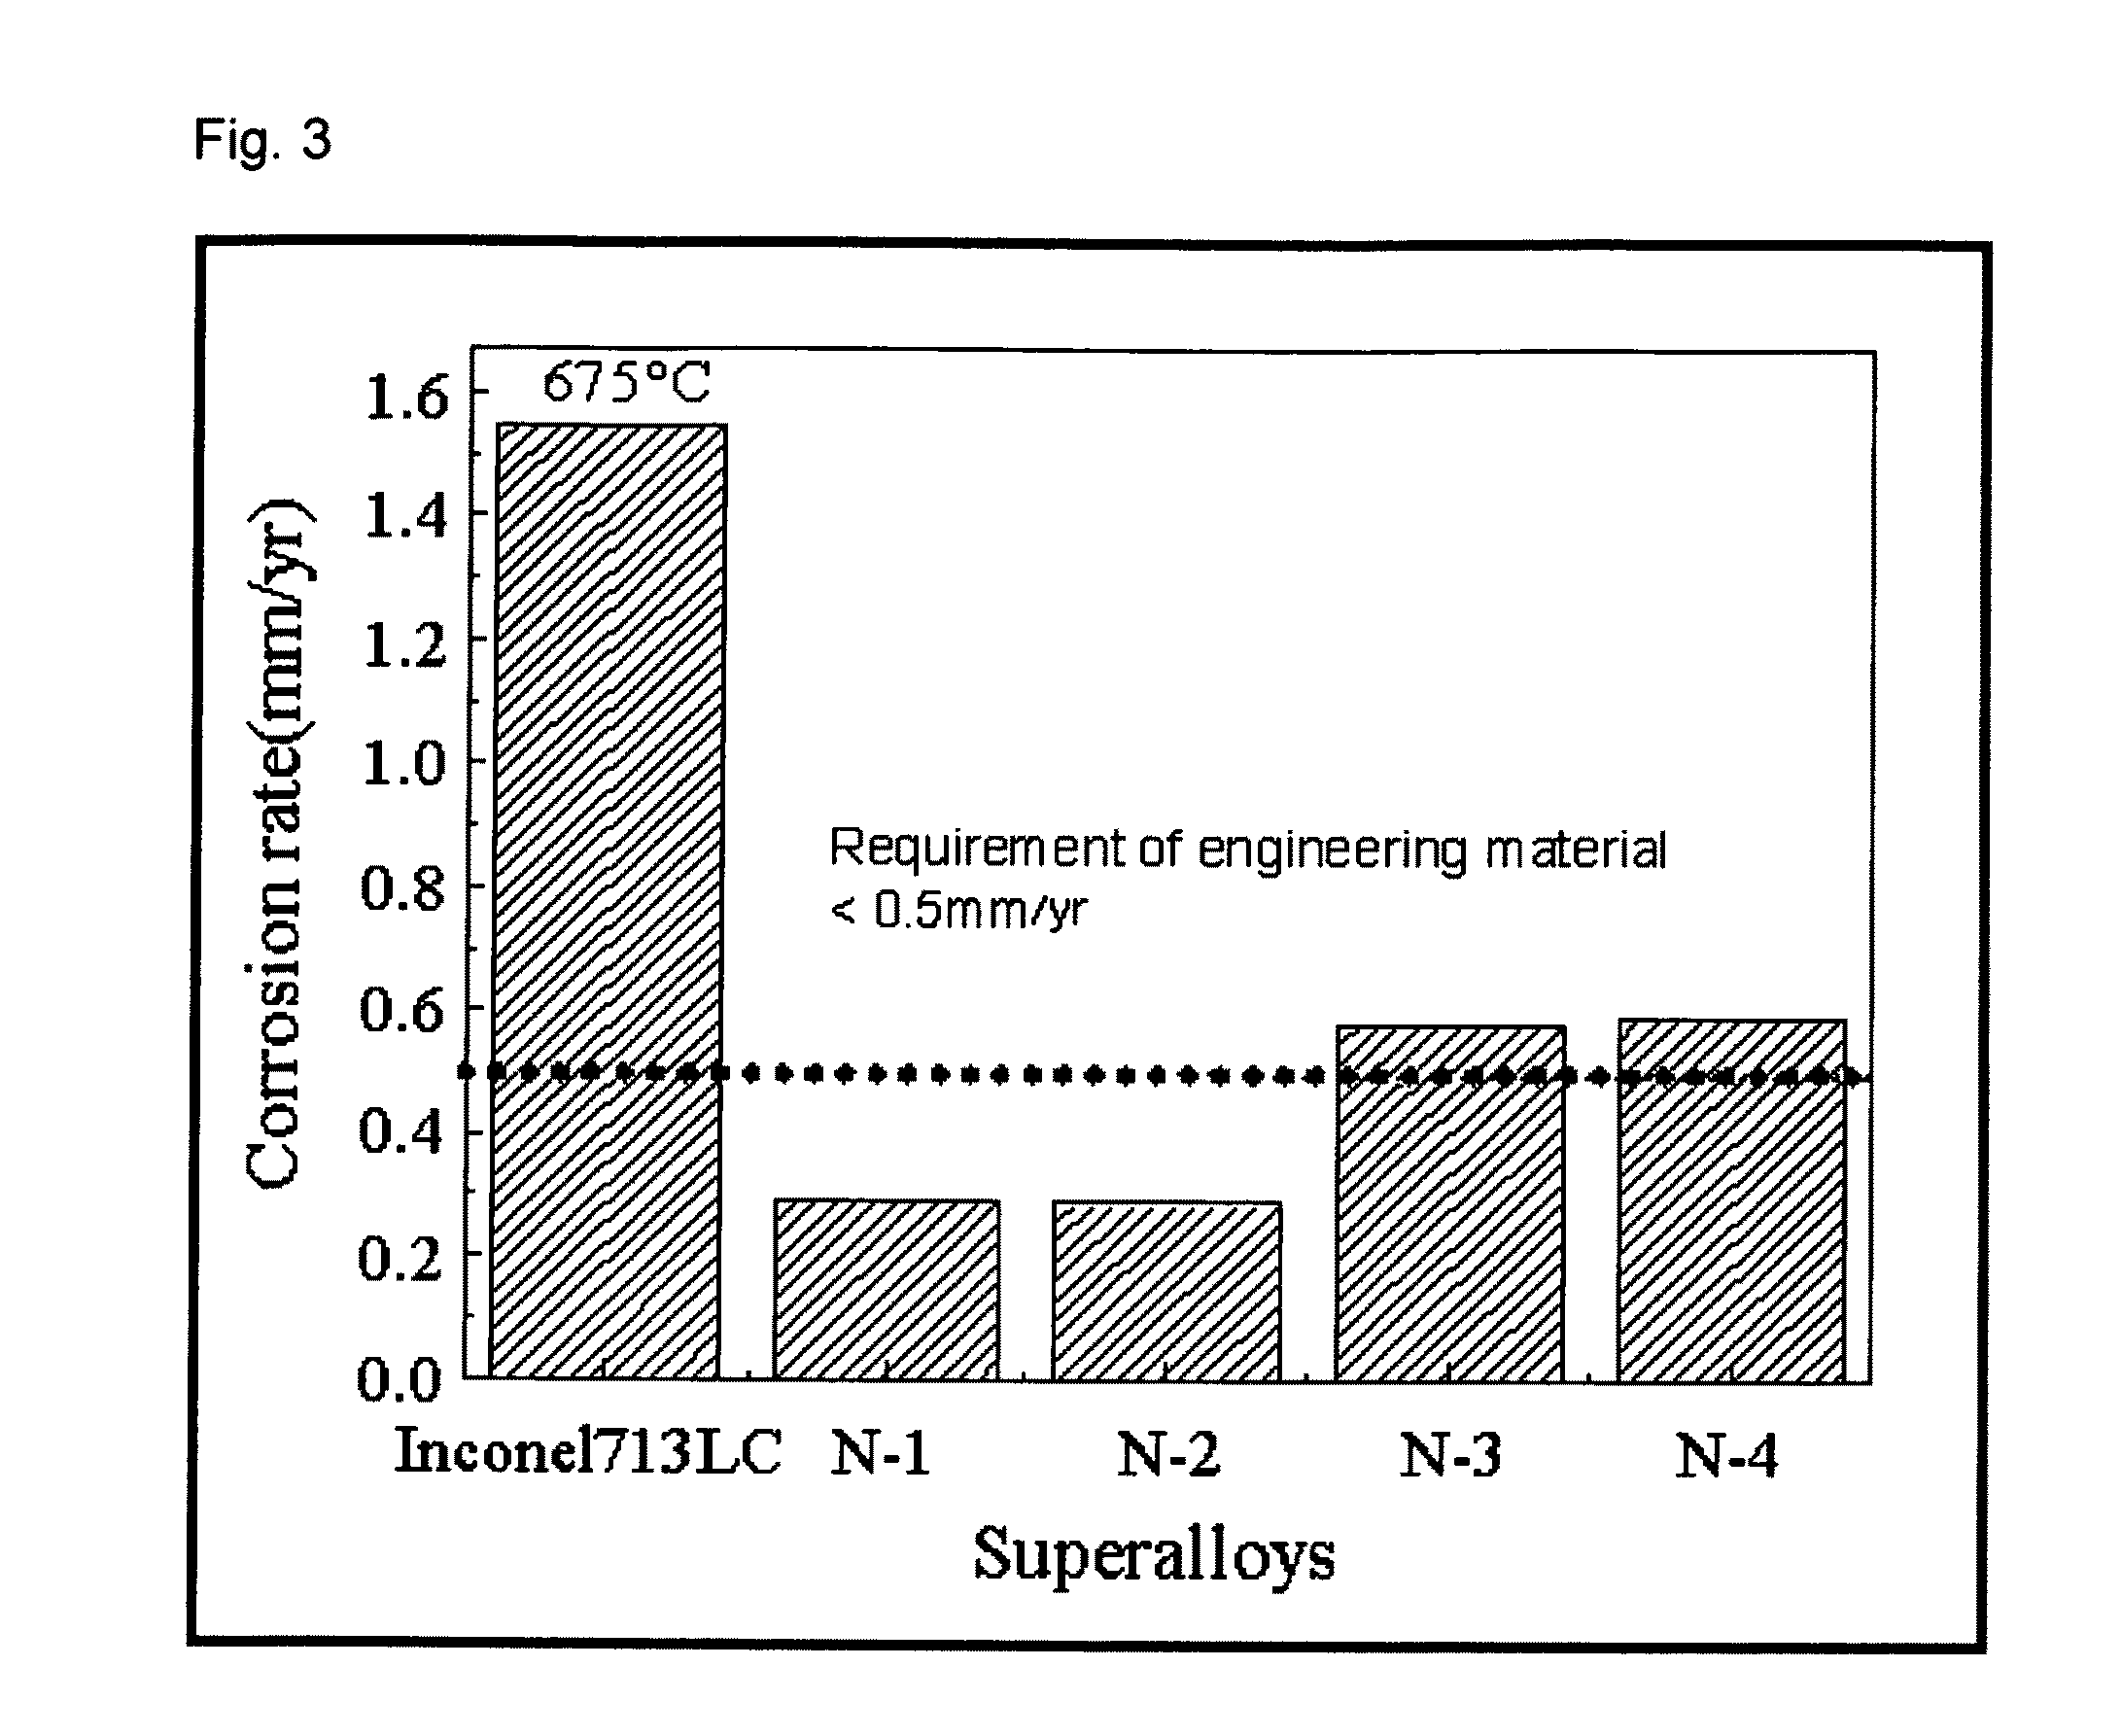 Corrosion Resistant Structural Alloy for Electrolytic Reduction Equipment for Spent Nuclear Fuel